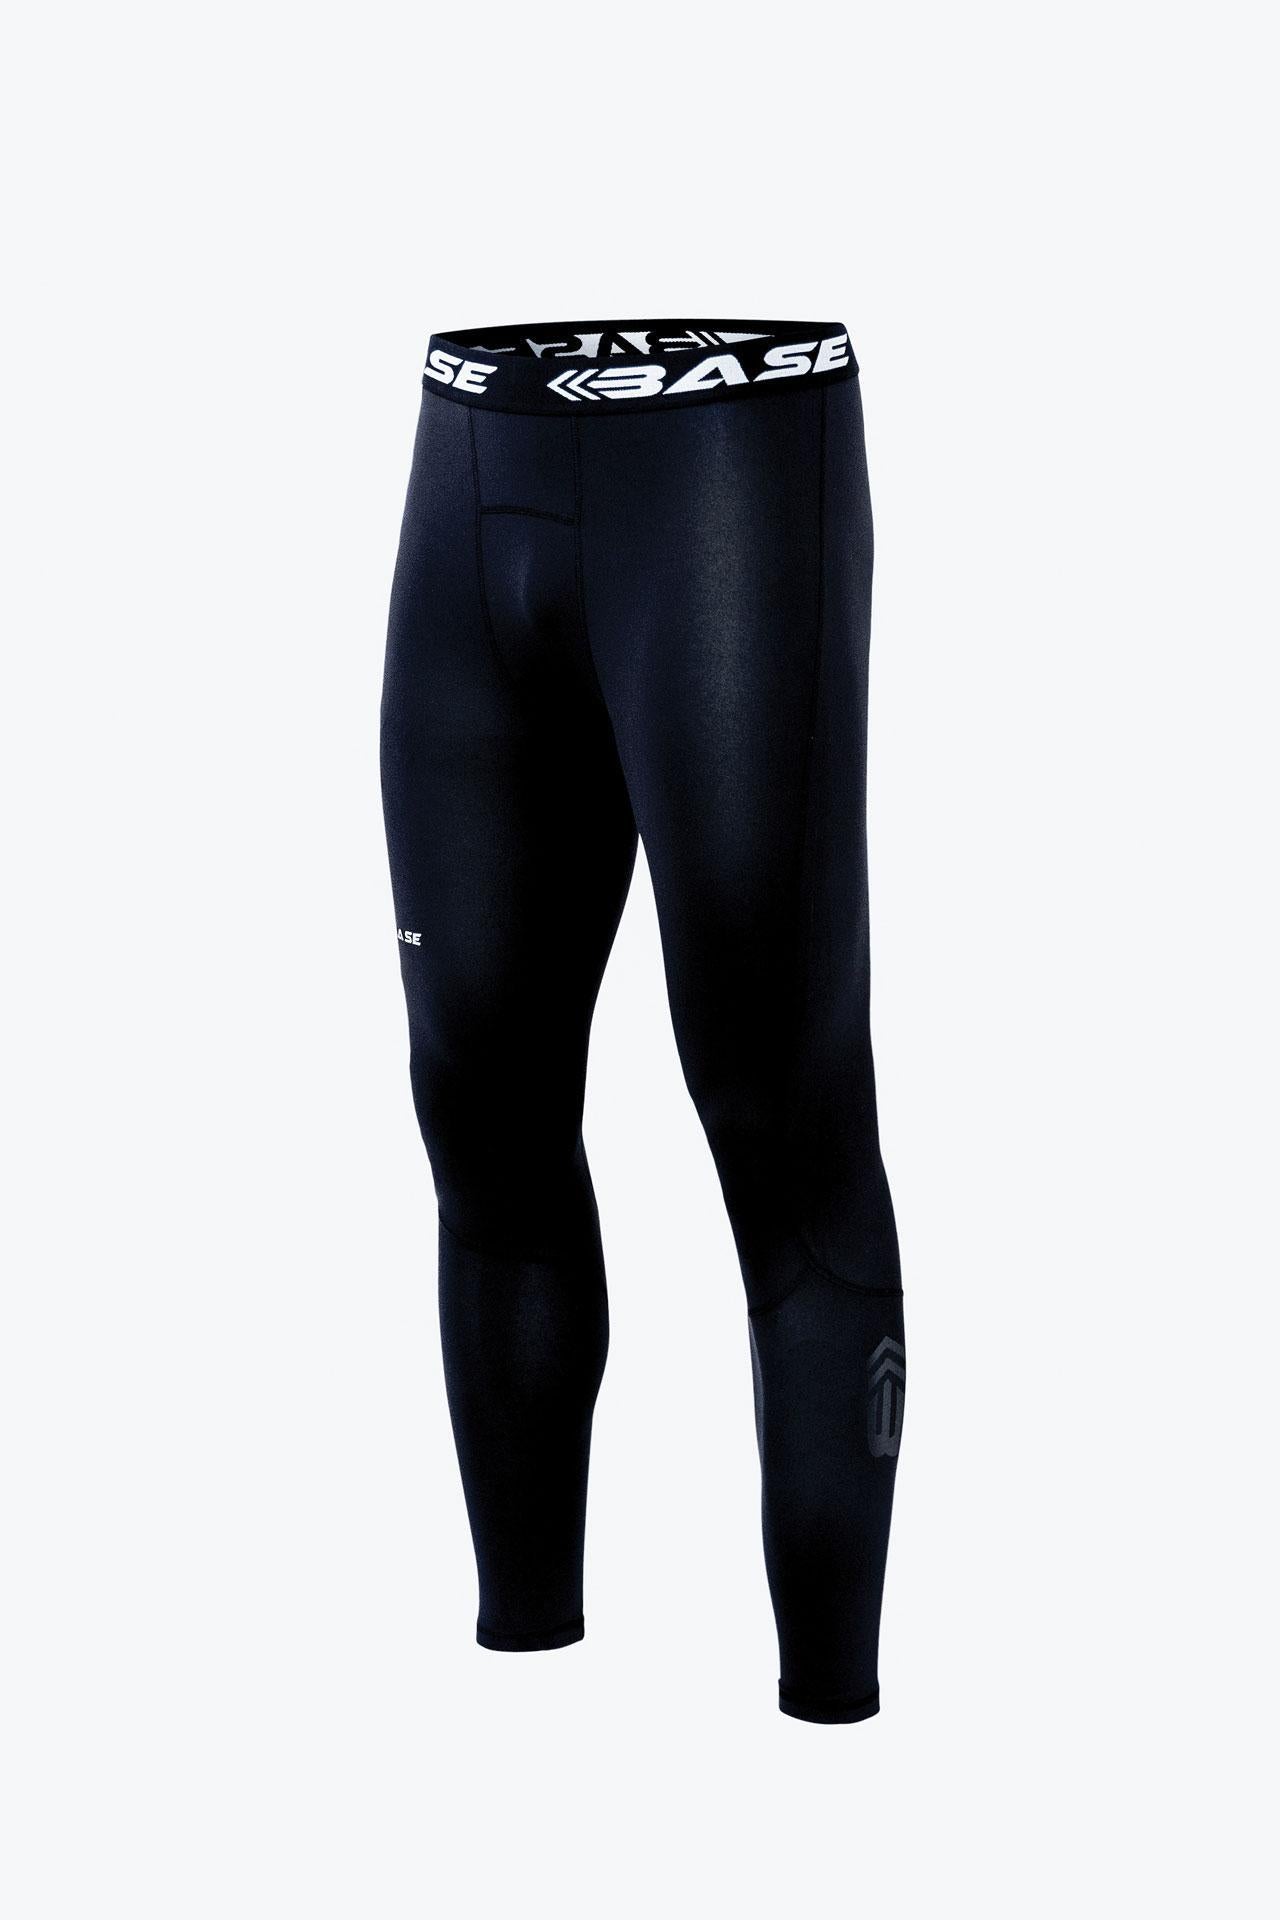 BASE Men's Recovery Tights - Black - Adelaide 36ers